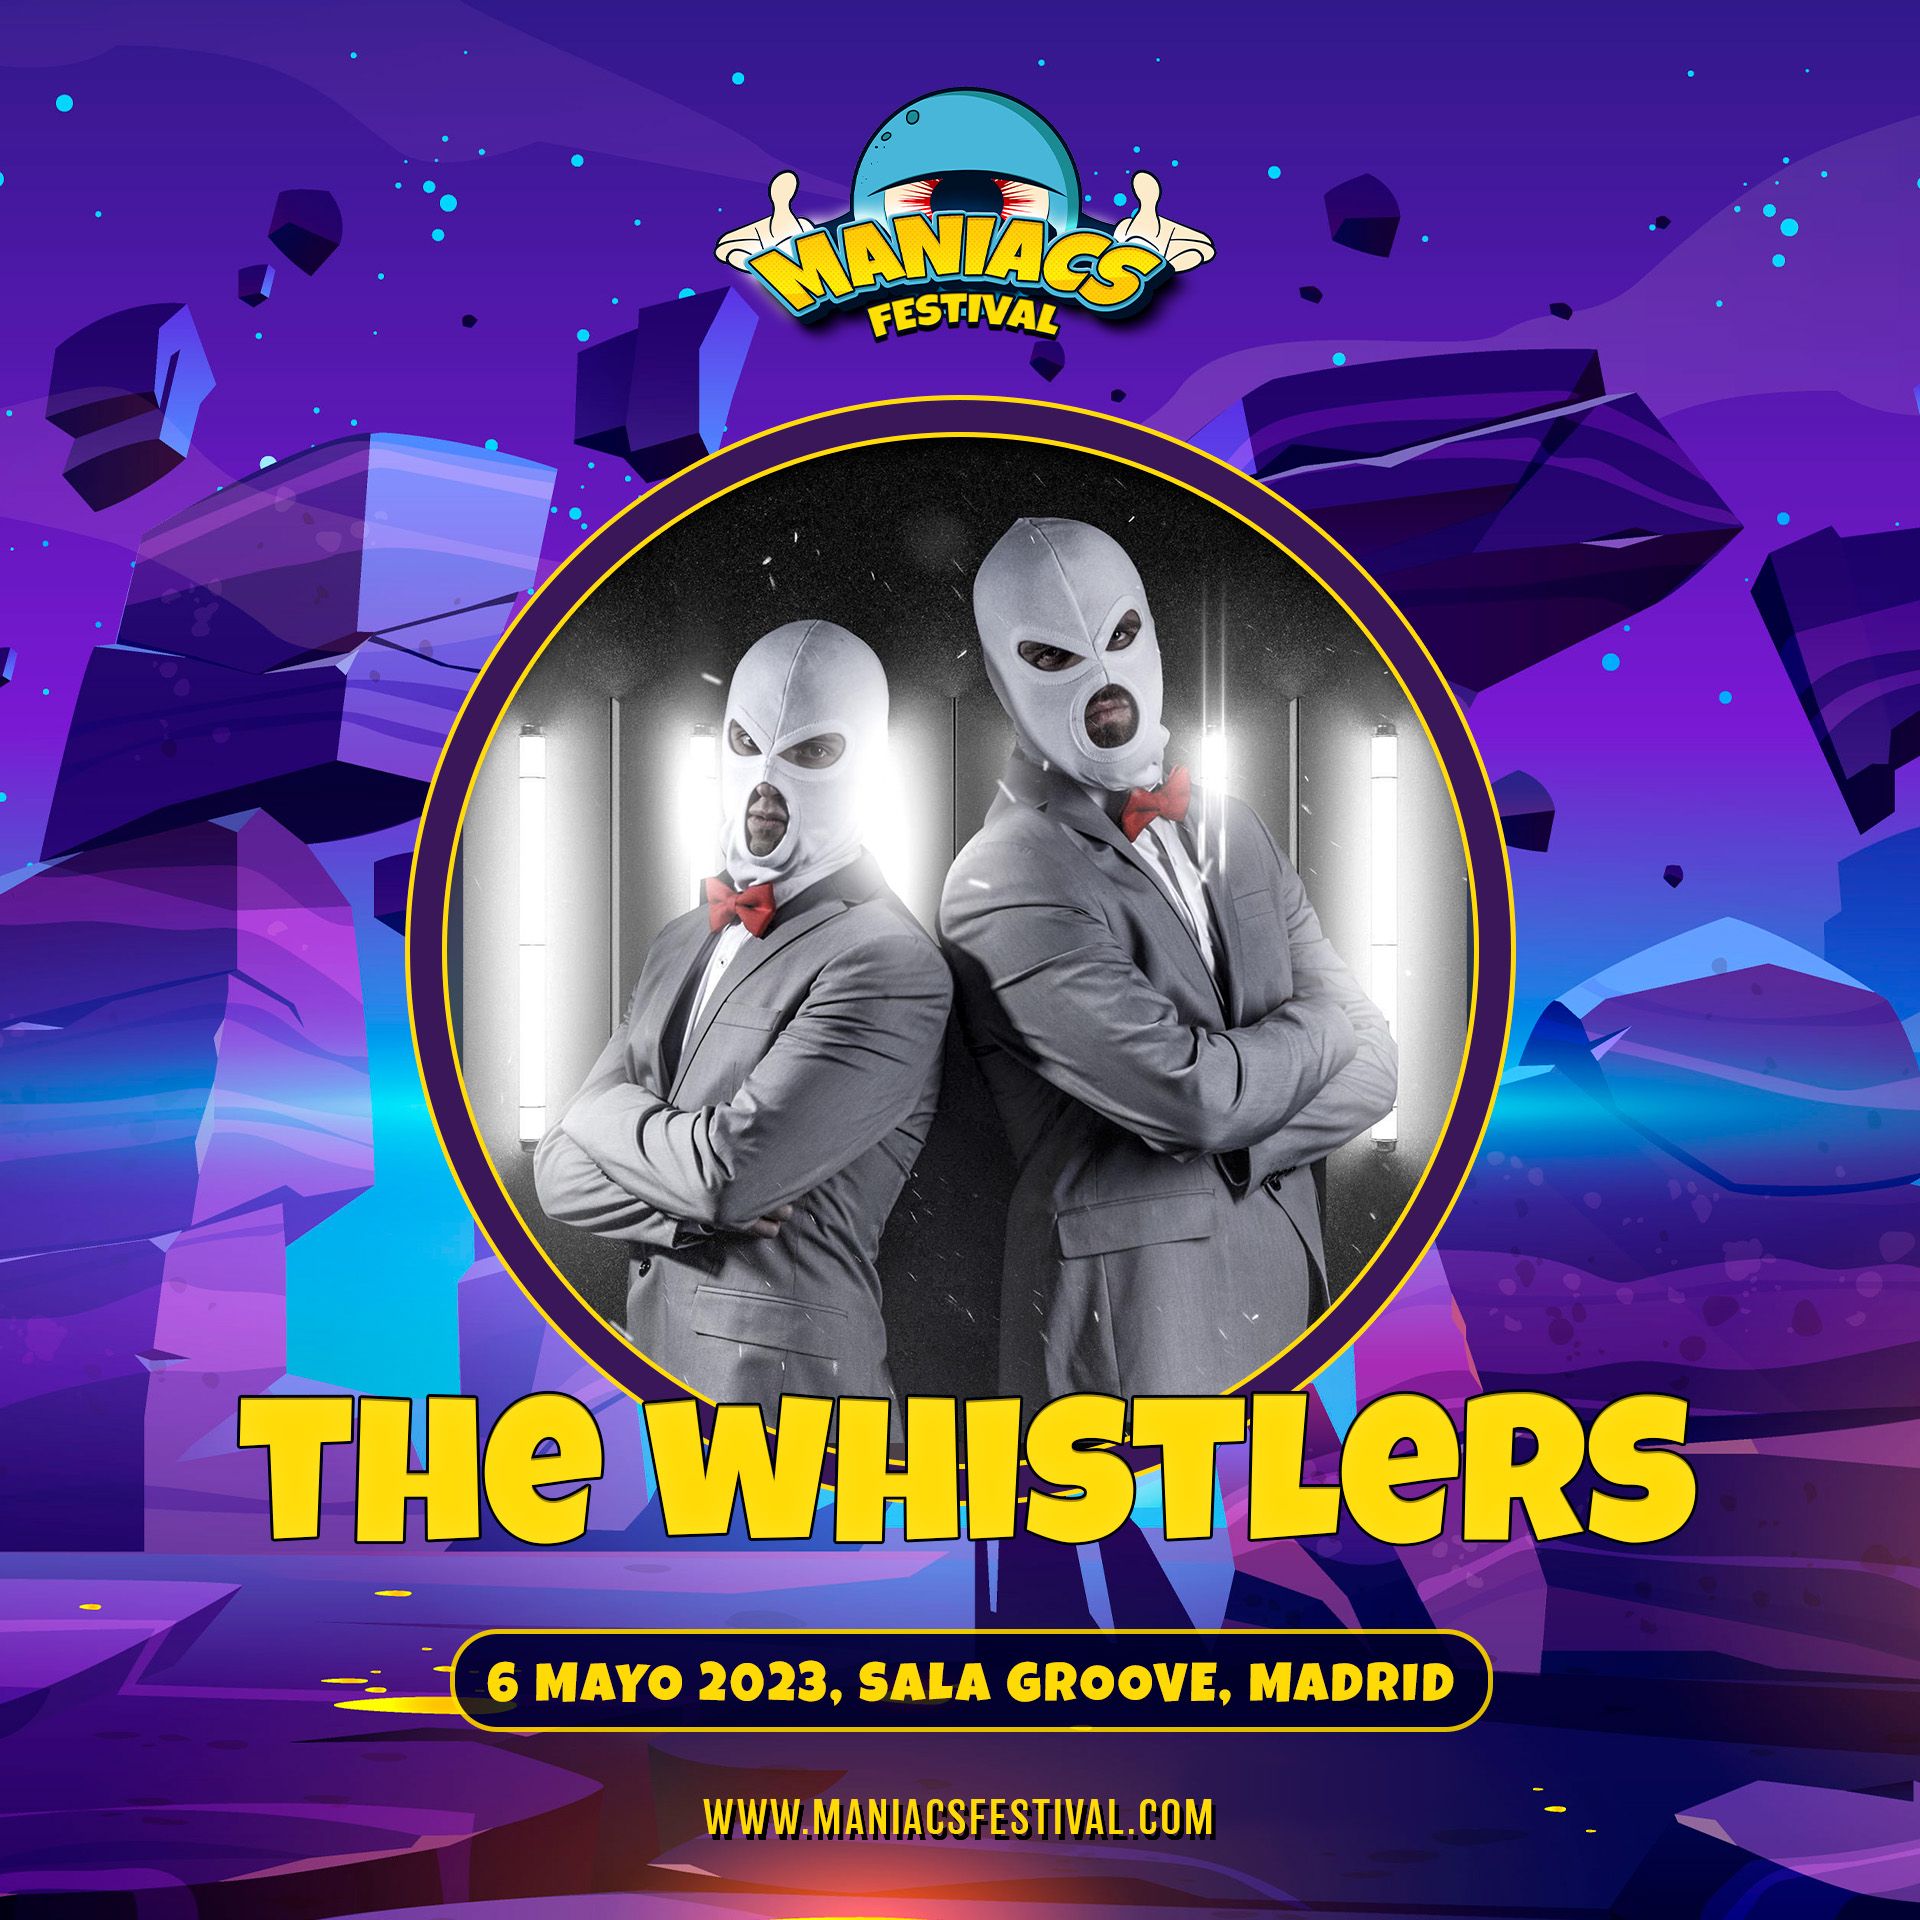 The Whistlers Maniacs Festival